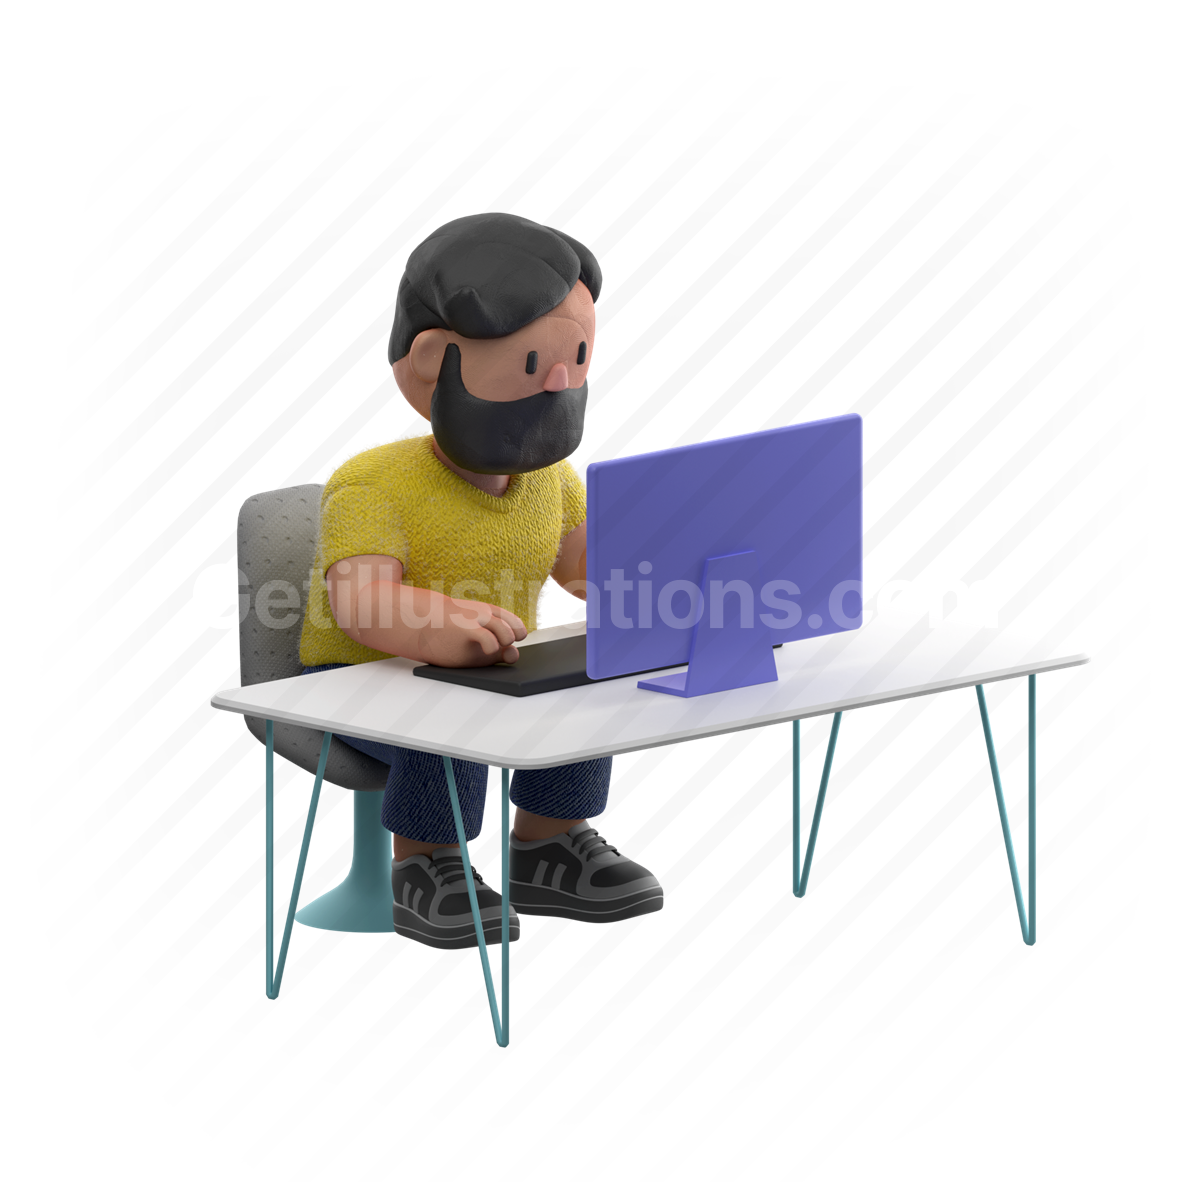 man, people, person, working, work, remote, computer, electronic, device, office, desk, furniture